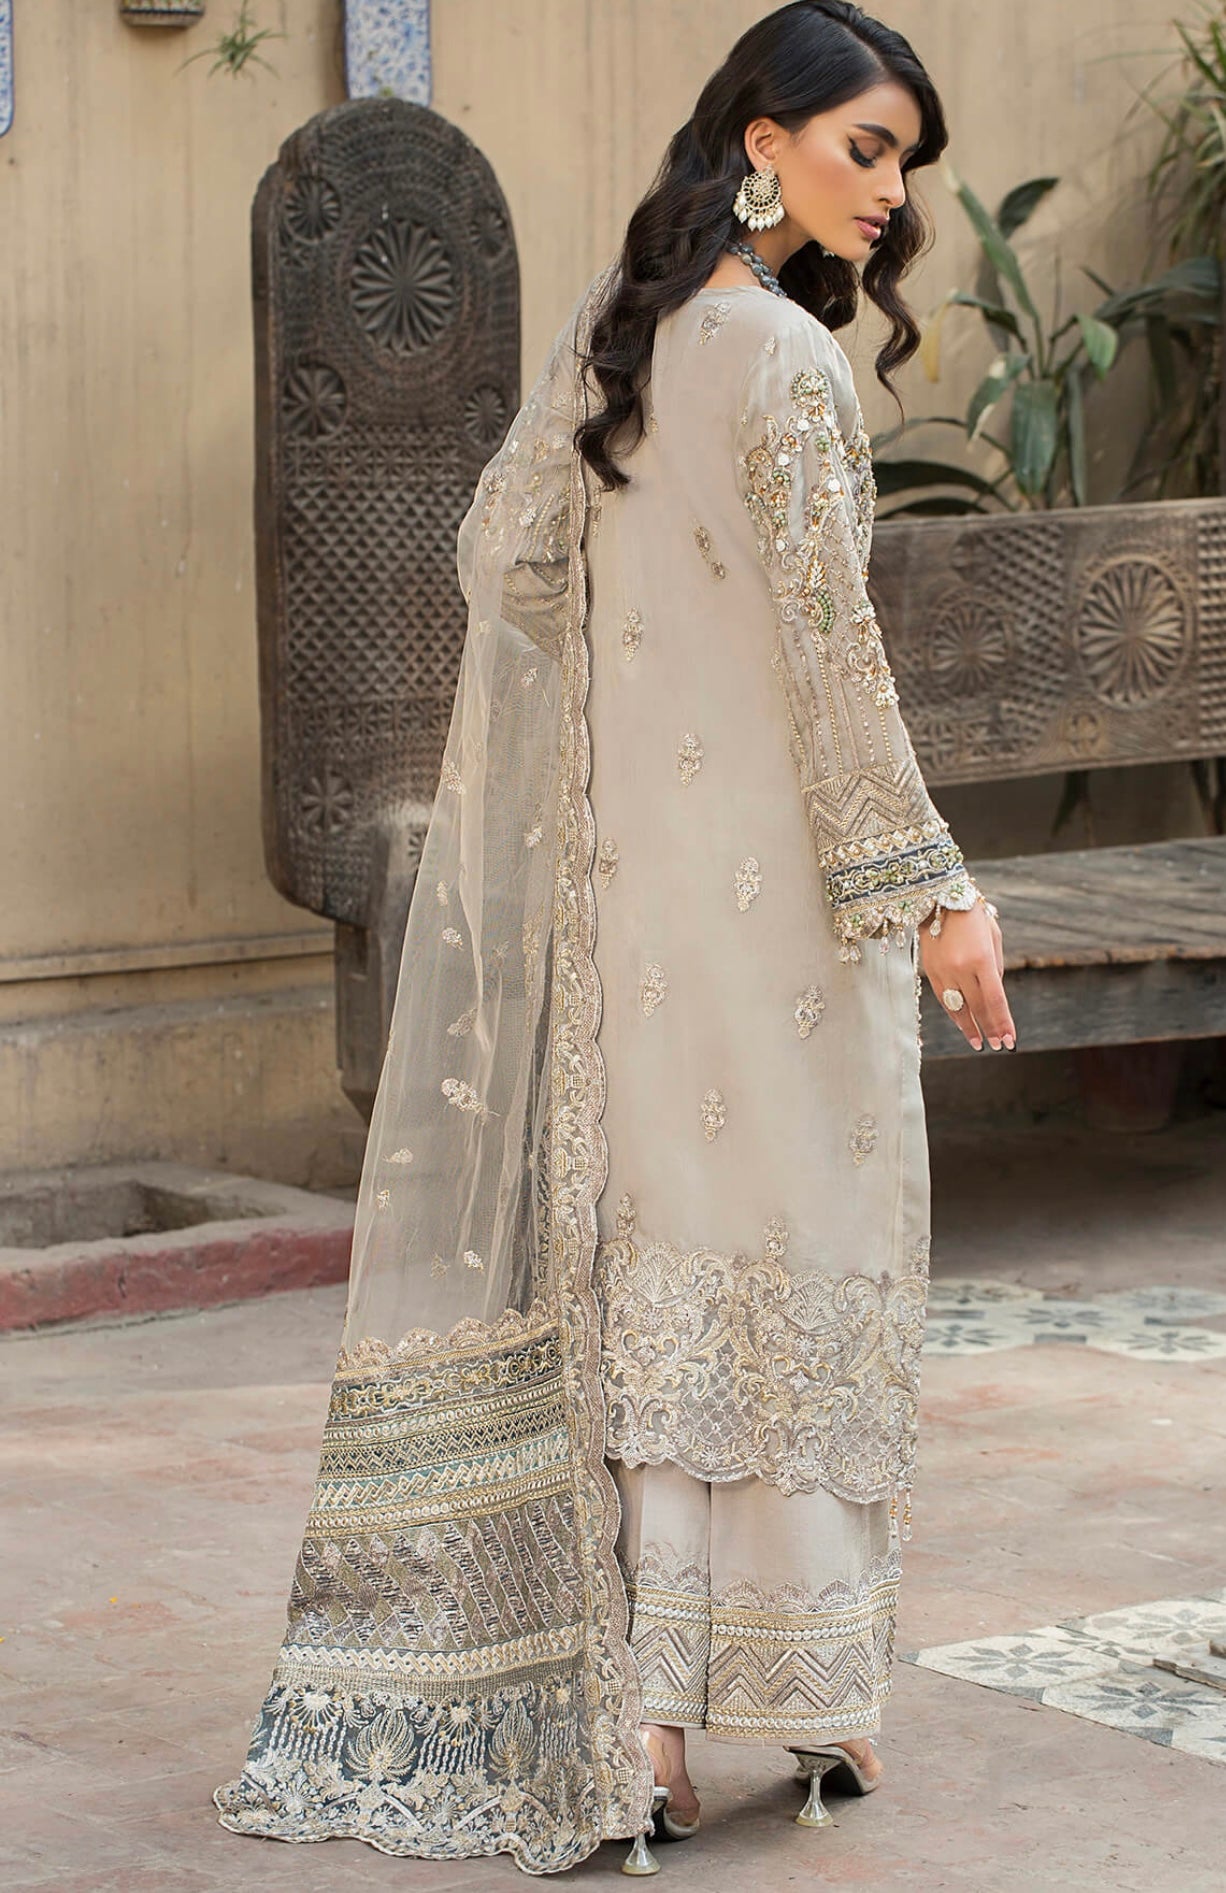 SIMRANS LUXURY Premium Embroidered 3 Piece Lilac Wedding Outfit LCR:9013